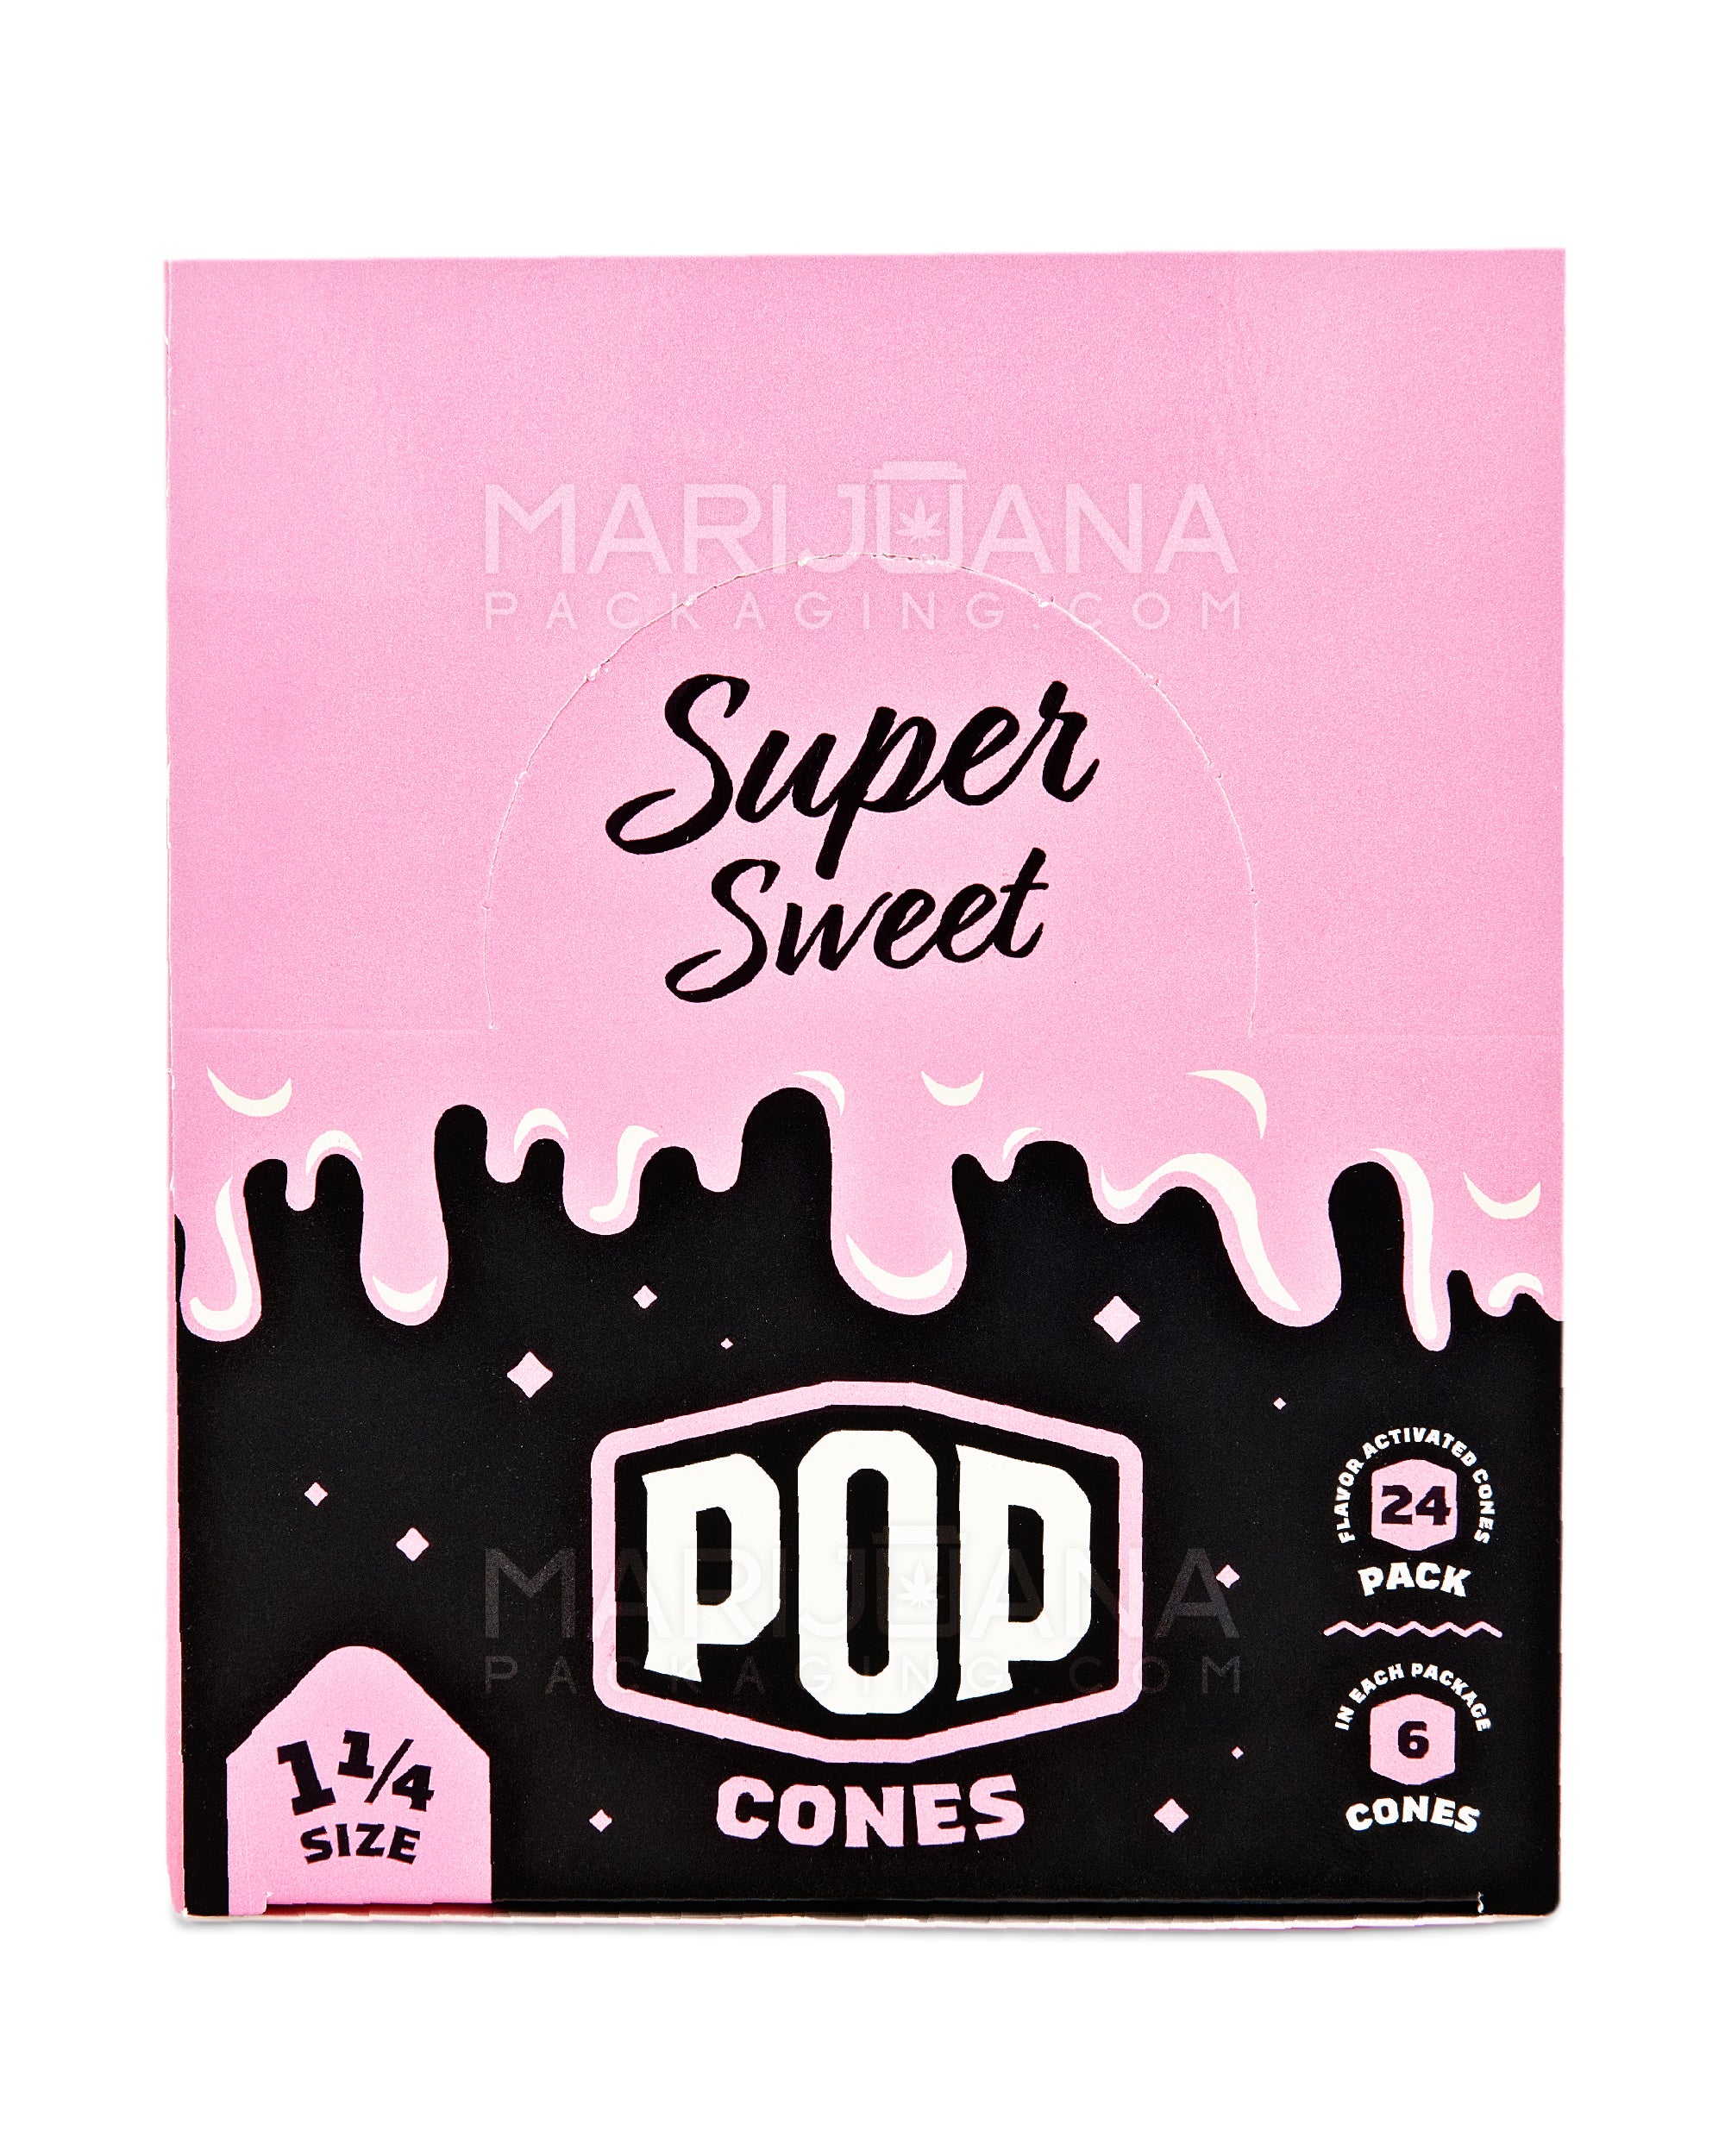 POP CONES | 'Retail Display' 1 1/4 Size Pre-Rolled Cones | 84mm - Super Sweet - 24 Count - 7